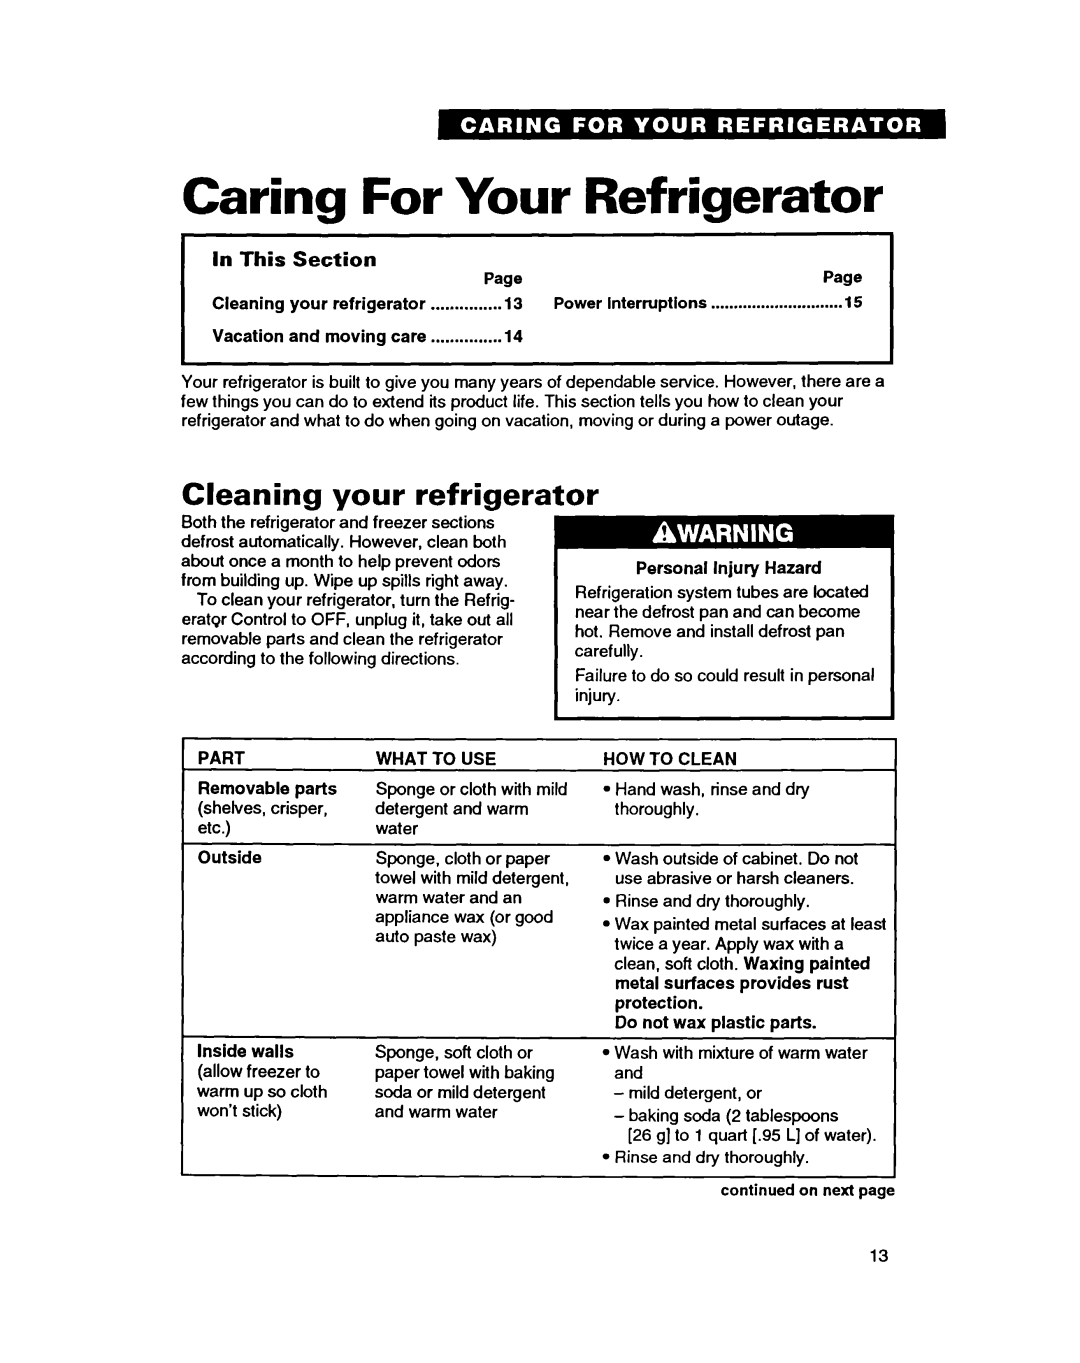 Whirlpool RT14HD, RT14GD, RT14EK Caring For Your Refrigerator, Cleaning your refrigerator, In This, Section 